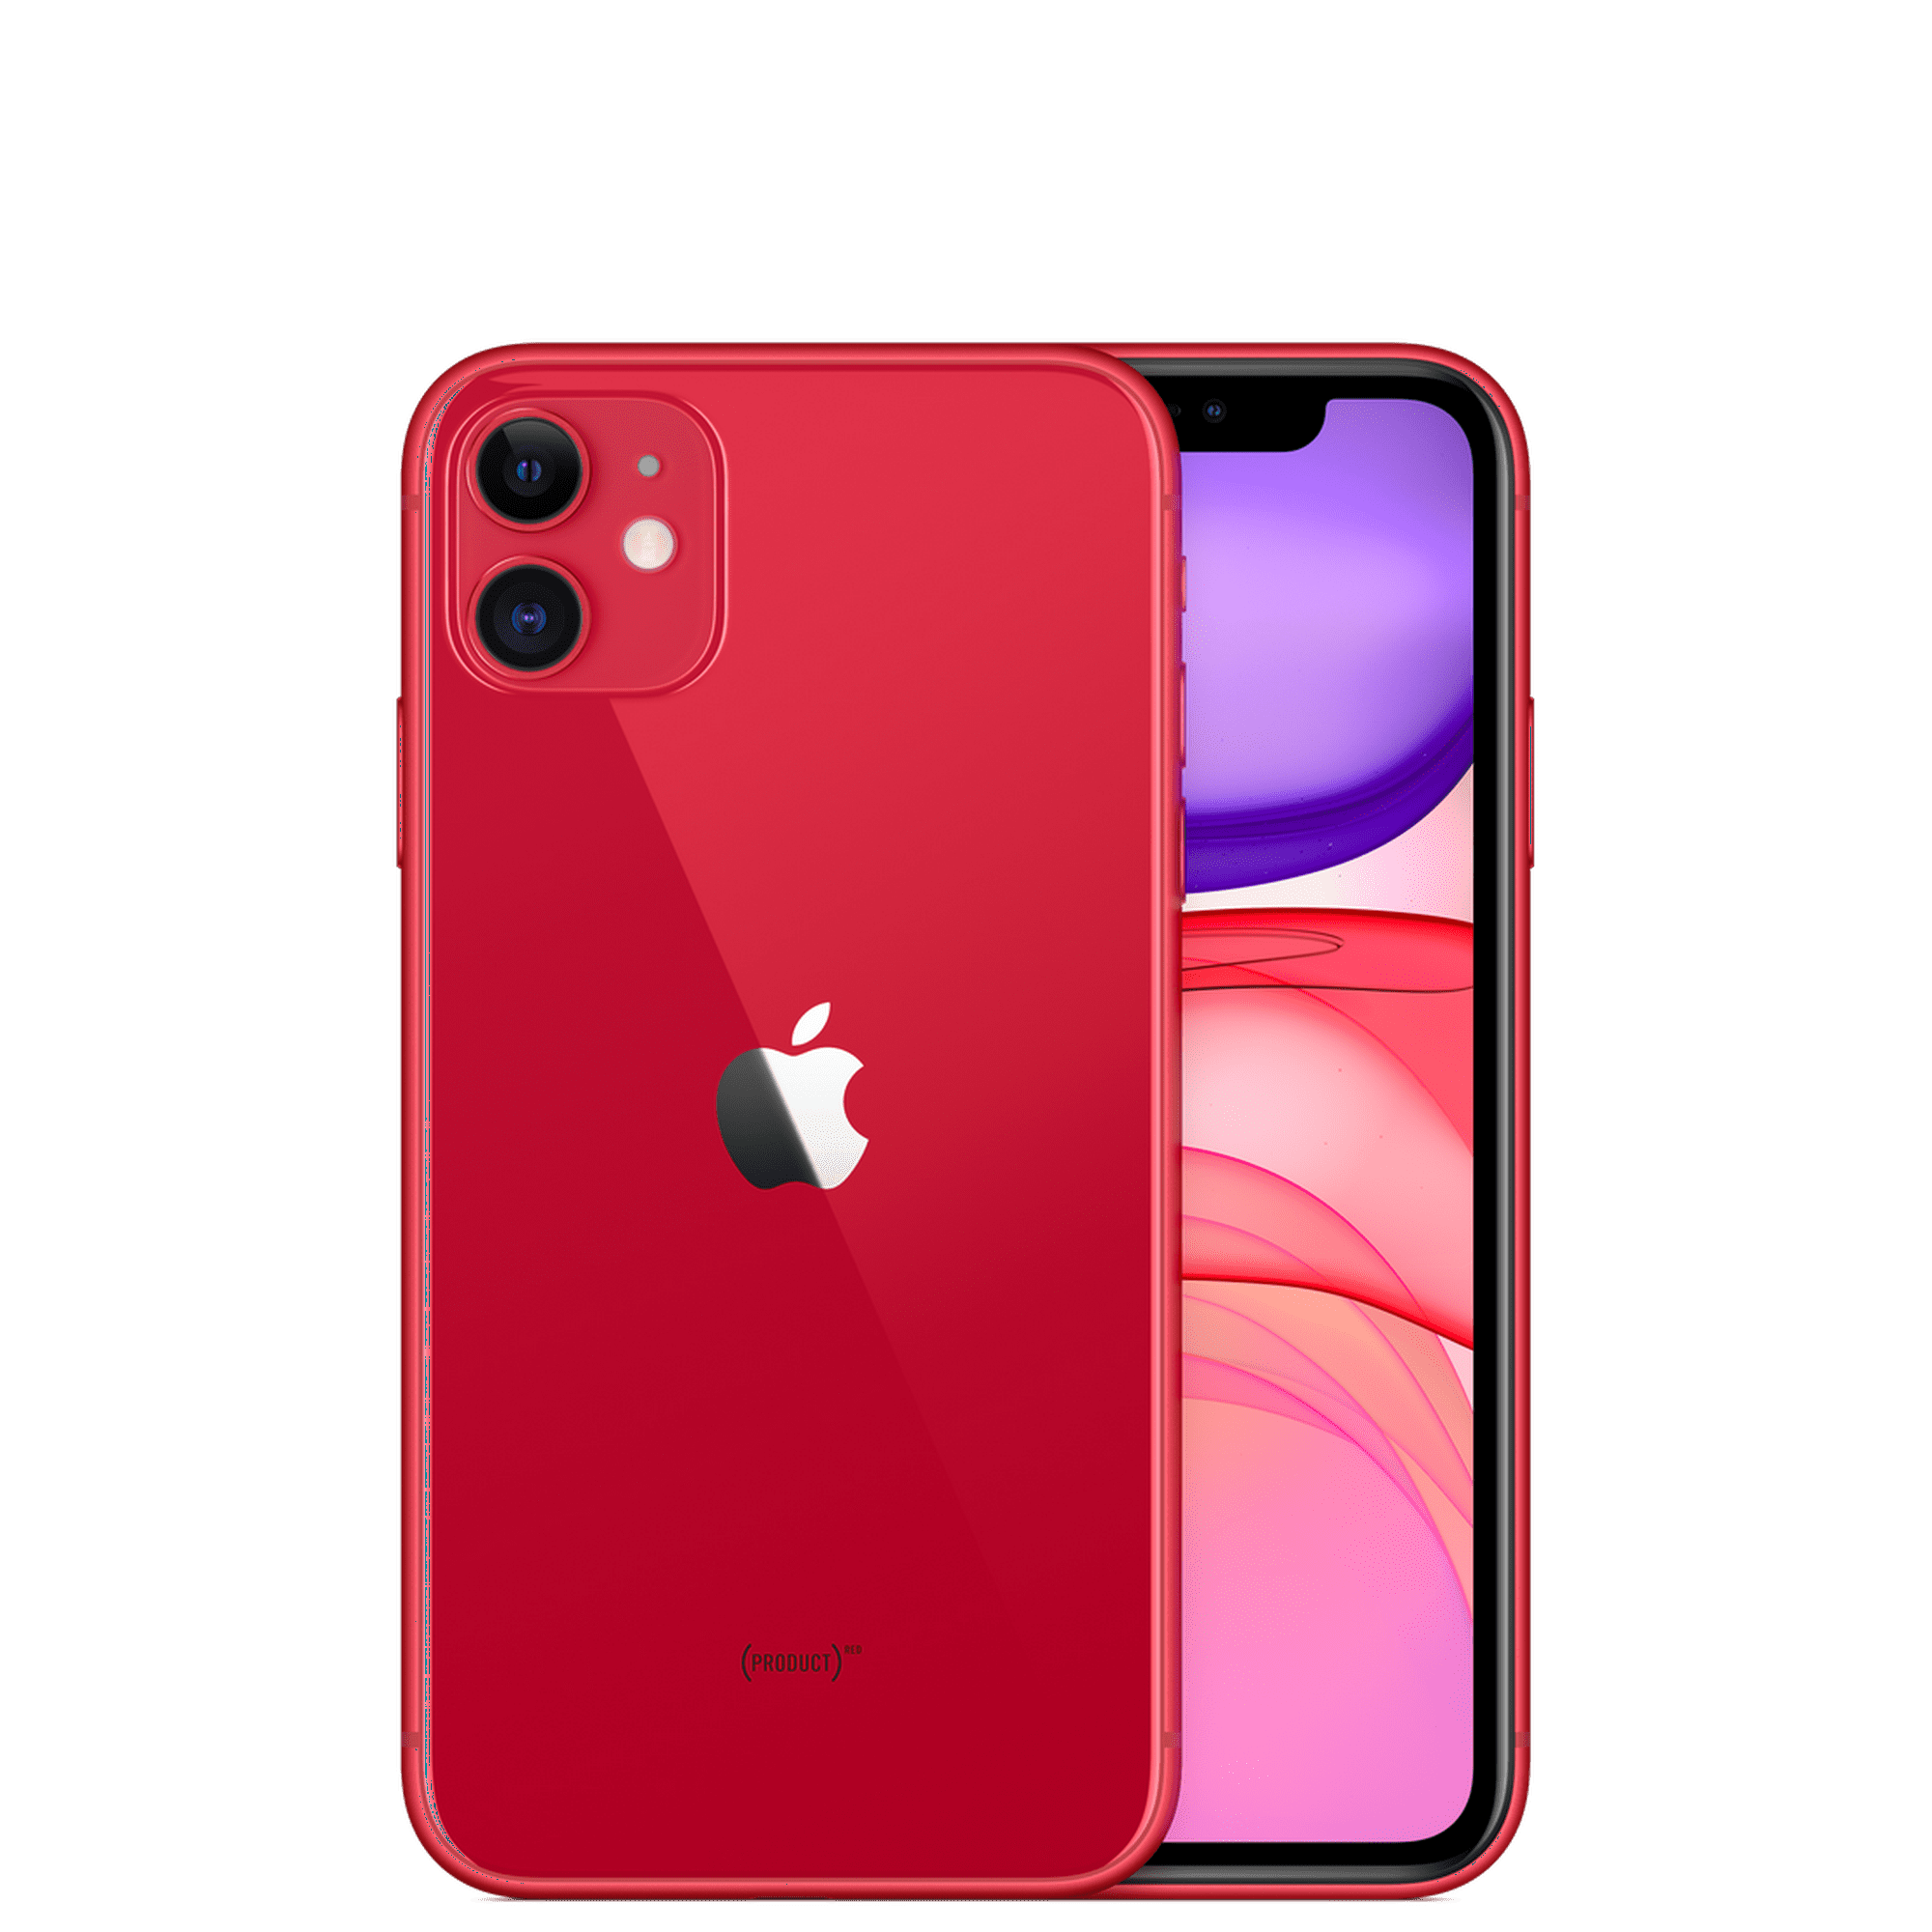 iPhone 11 (PRODUCT)RED 64 GB